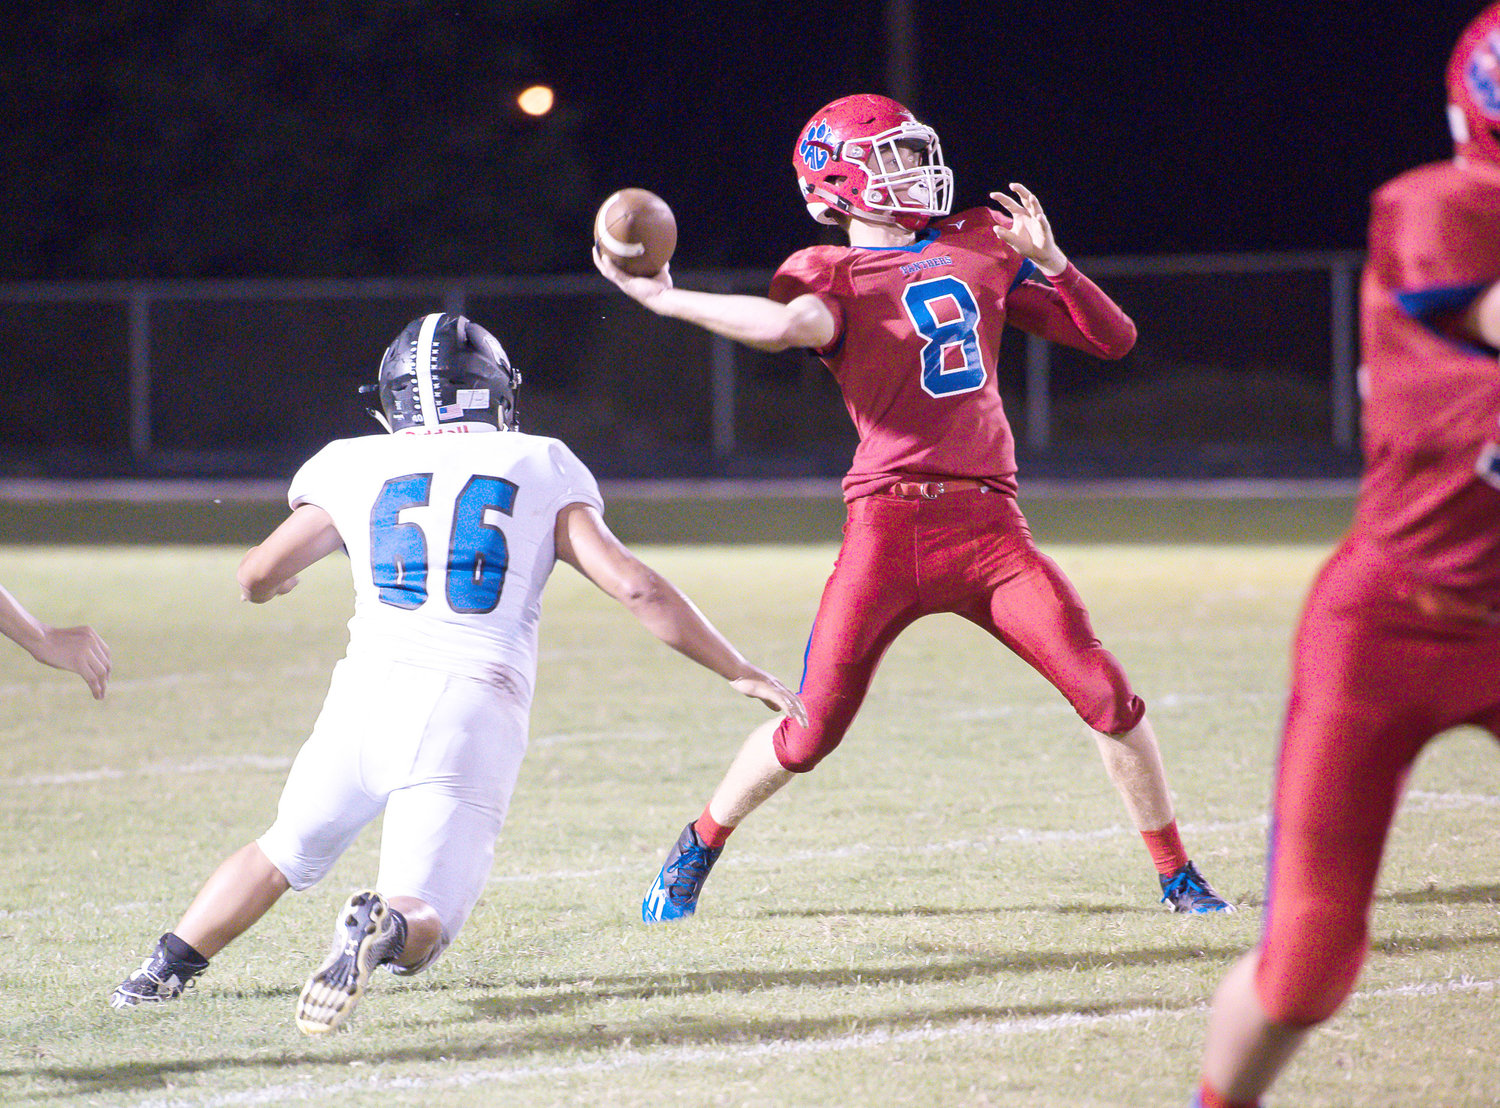 Senior Cody Frazier drops back for a pass in Alba-Golden’s loss to All Saints. (Photo by Chad Parrish)